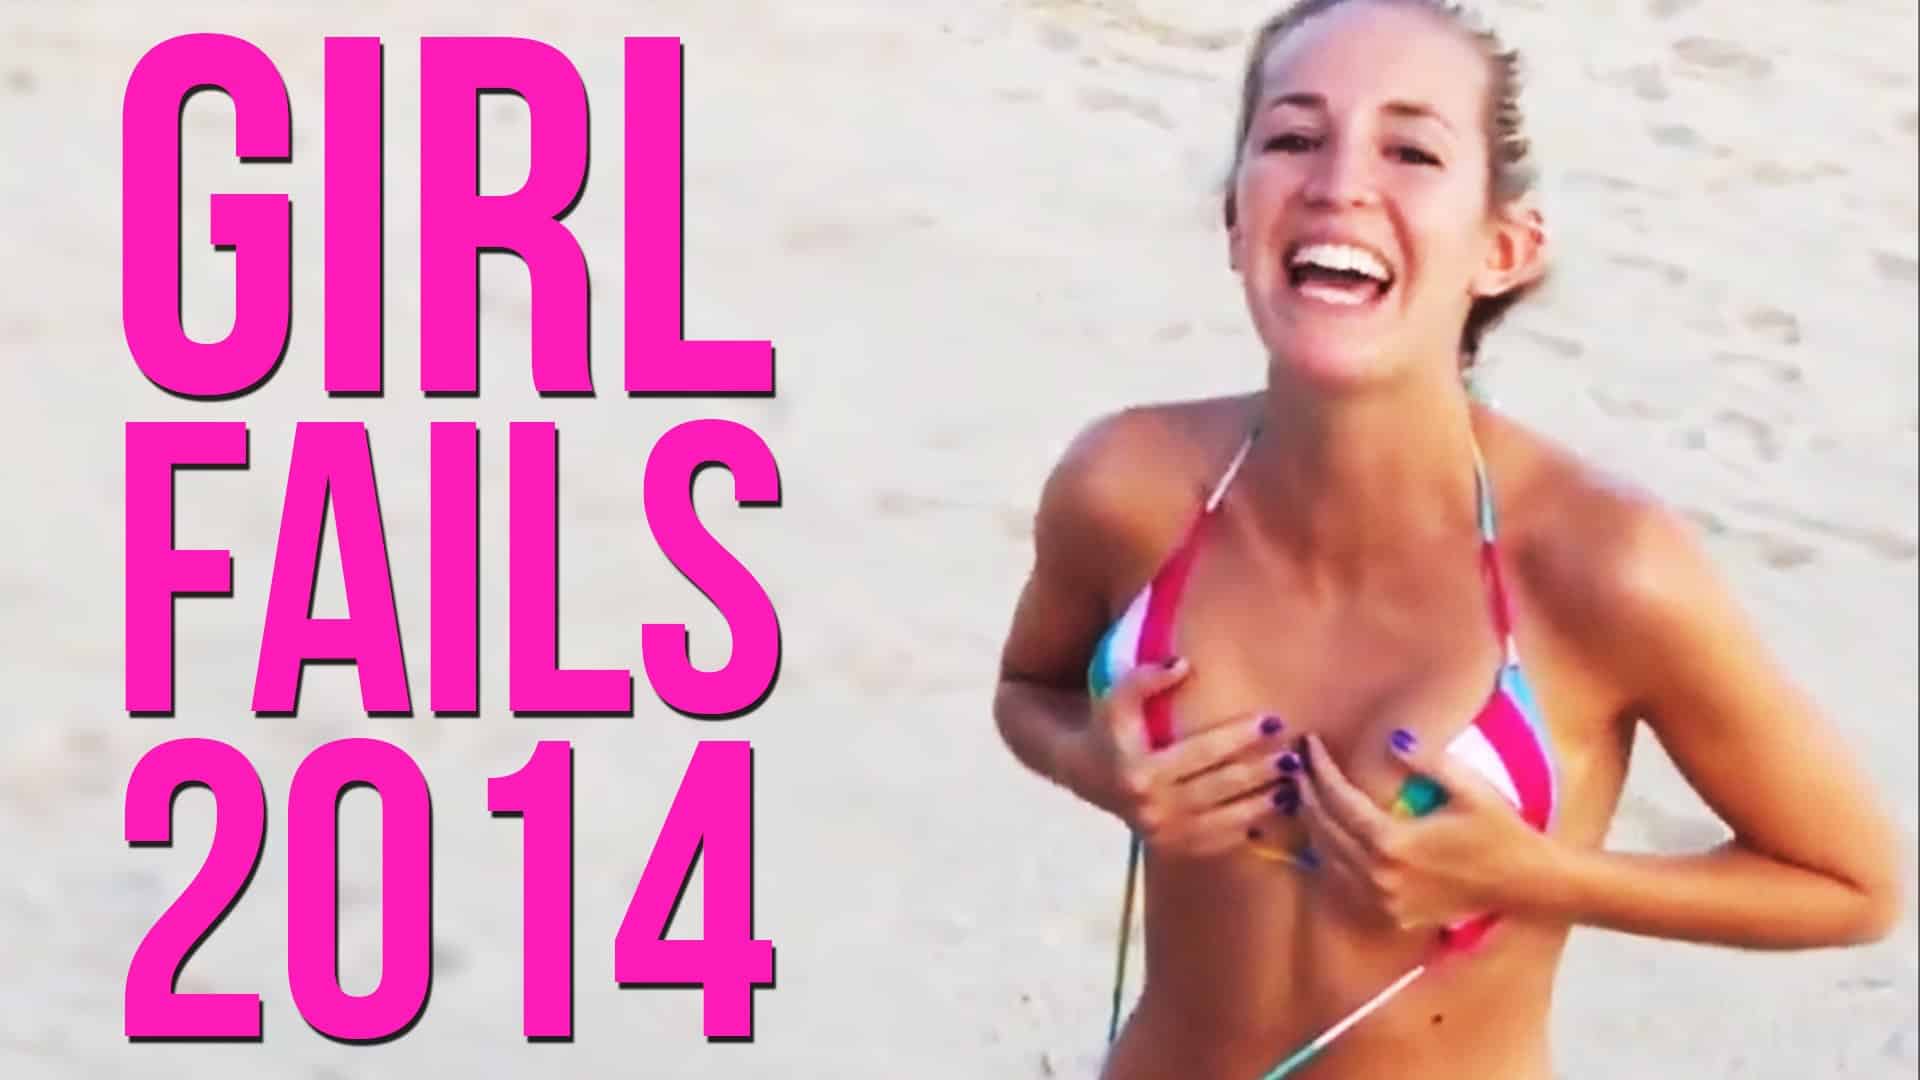 Ultimate Girls Fails of the Year 2014